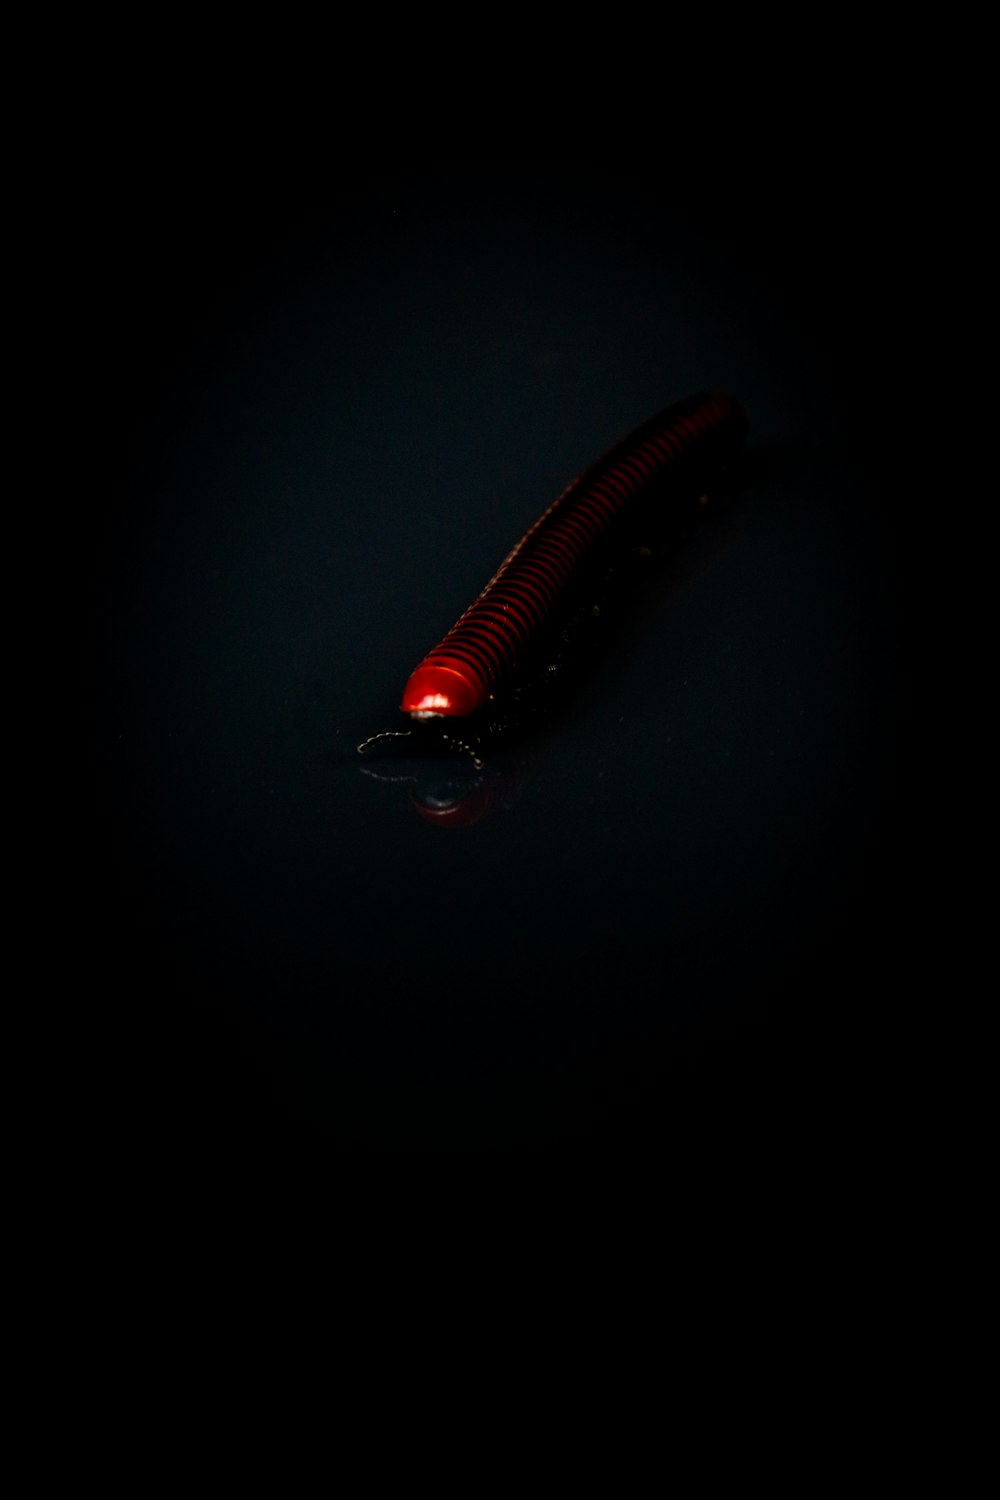 a red light shining on a black background